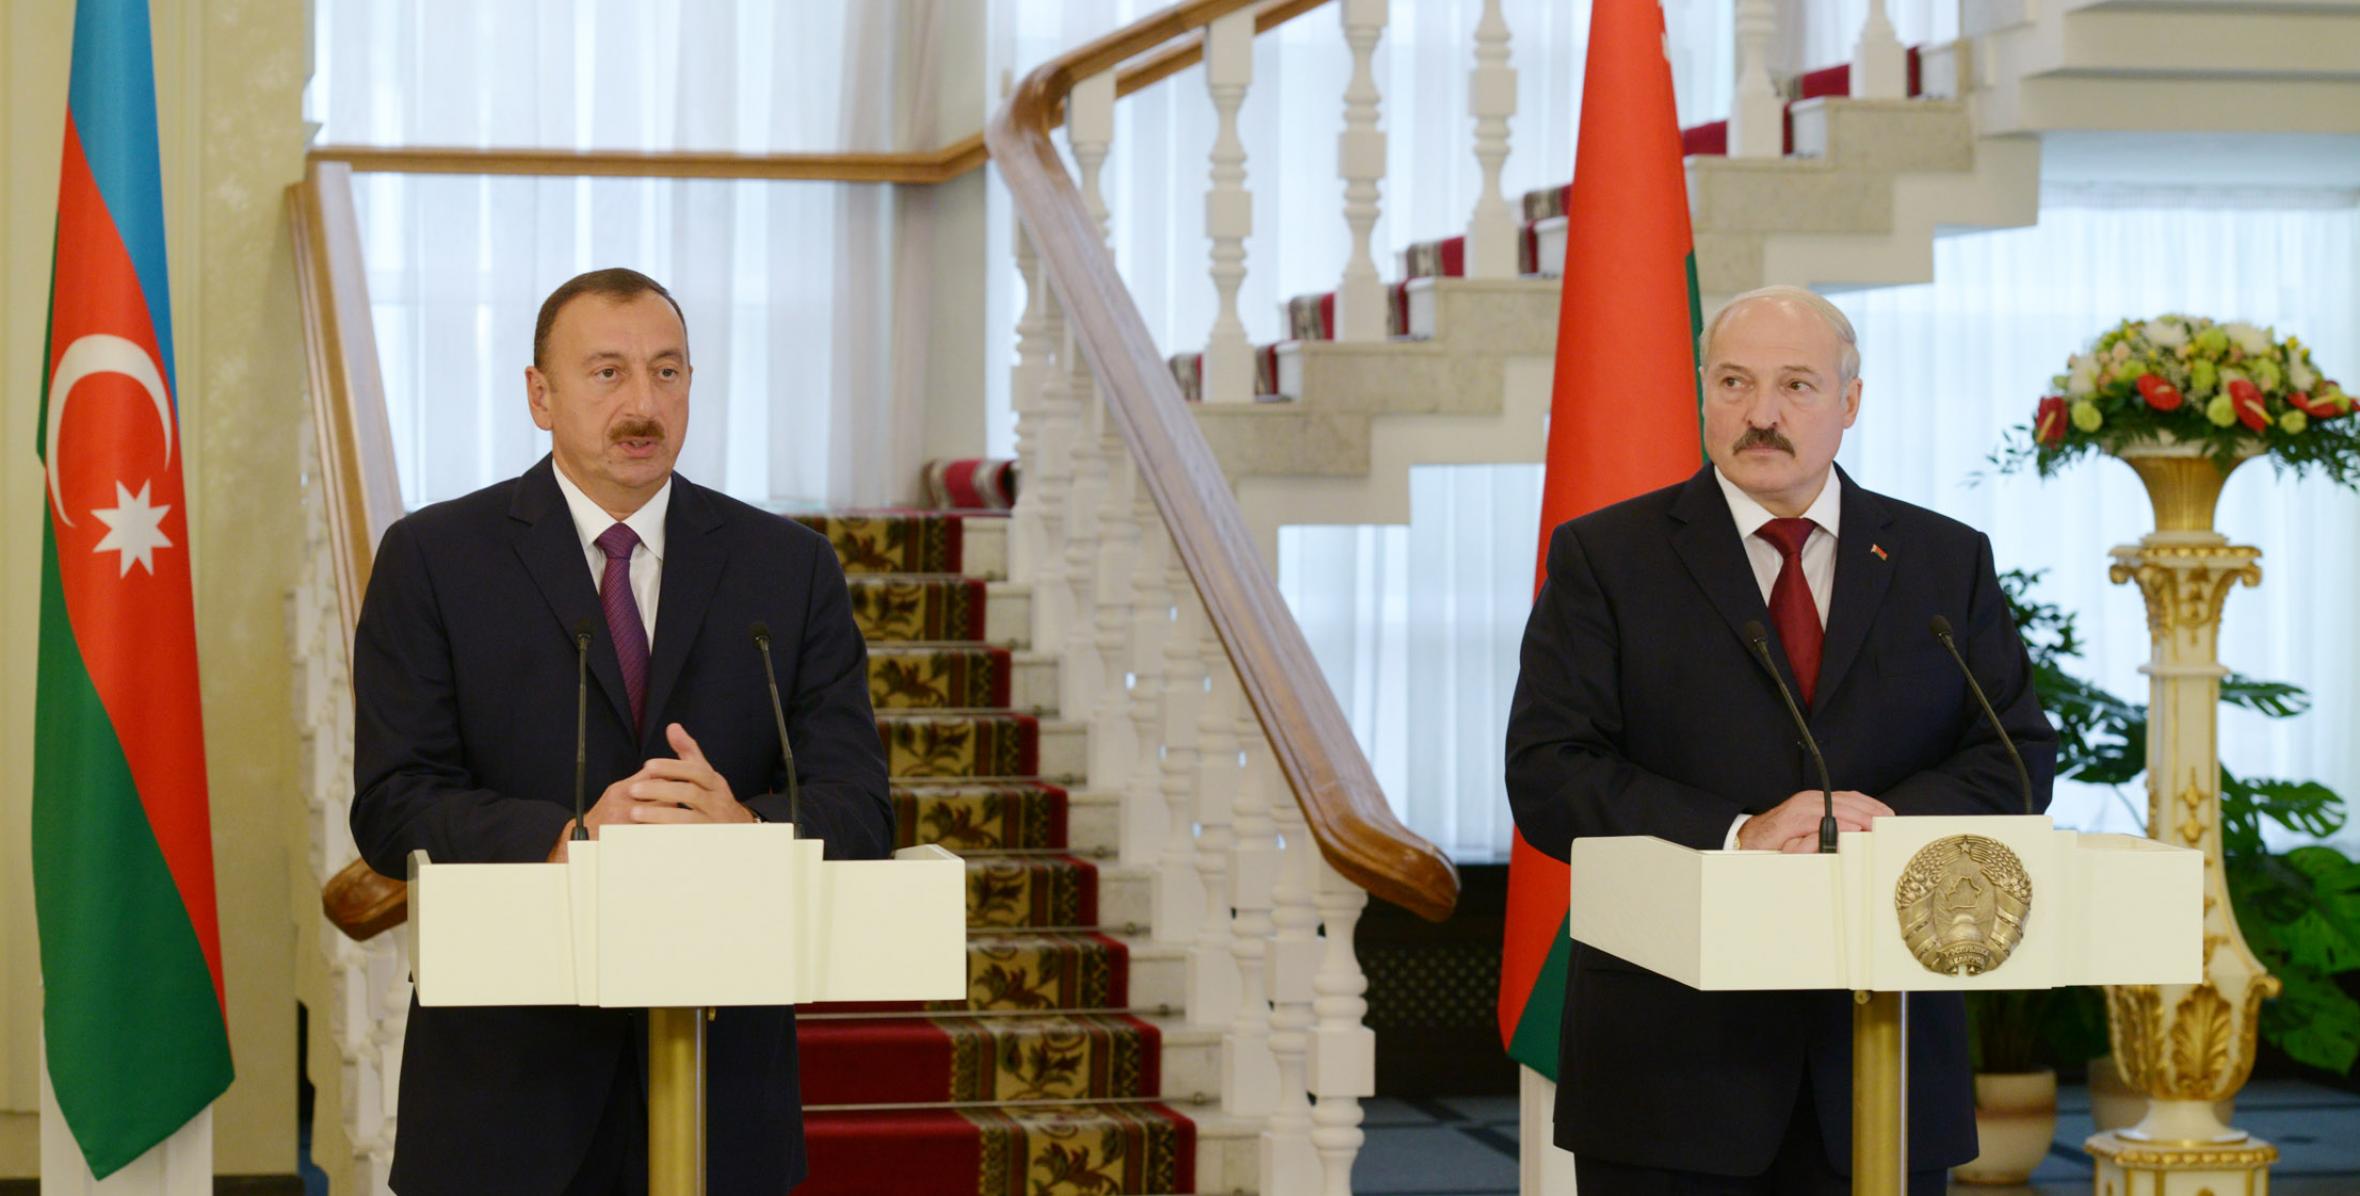 Presidents of Azerbaijan and Belarus made statements for the press